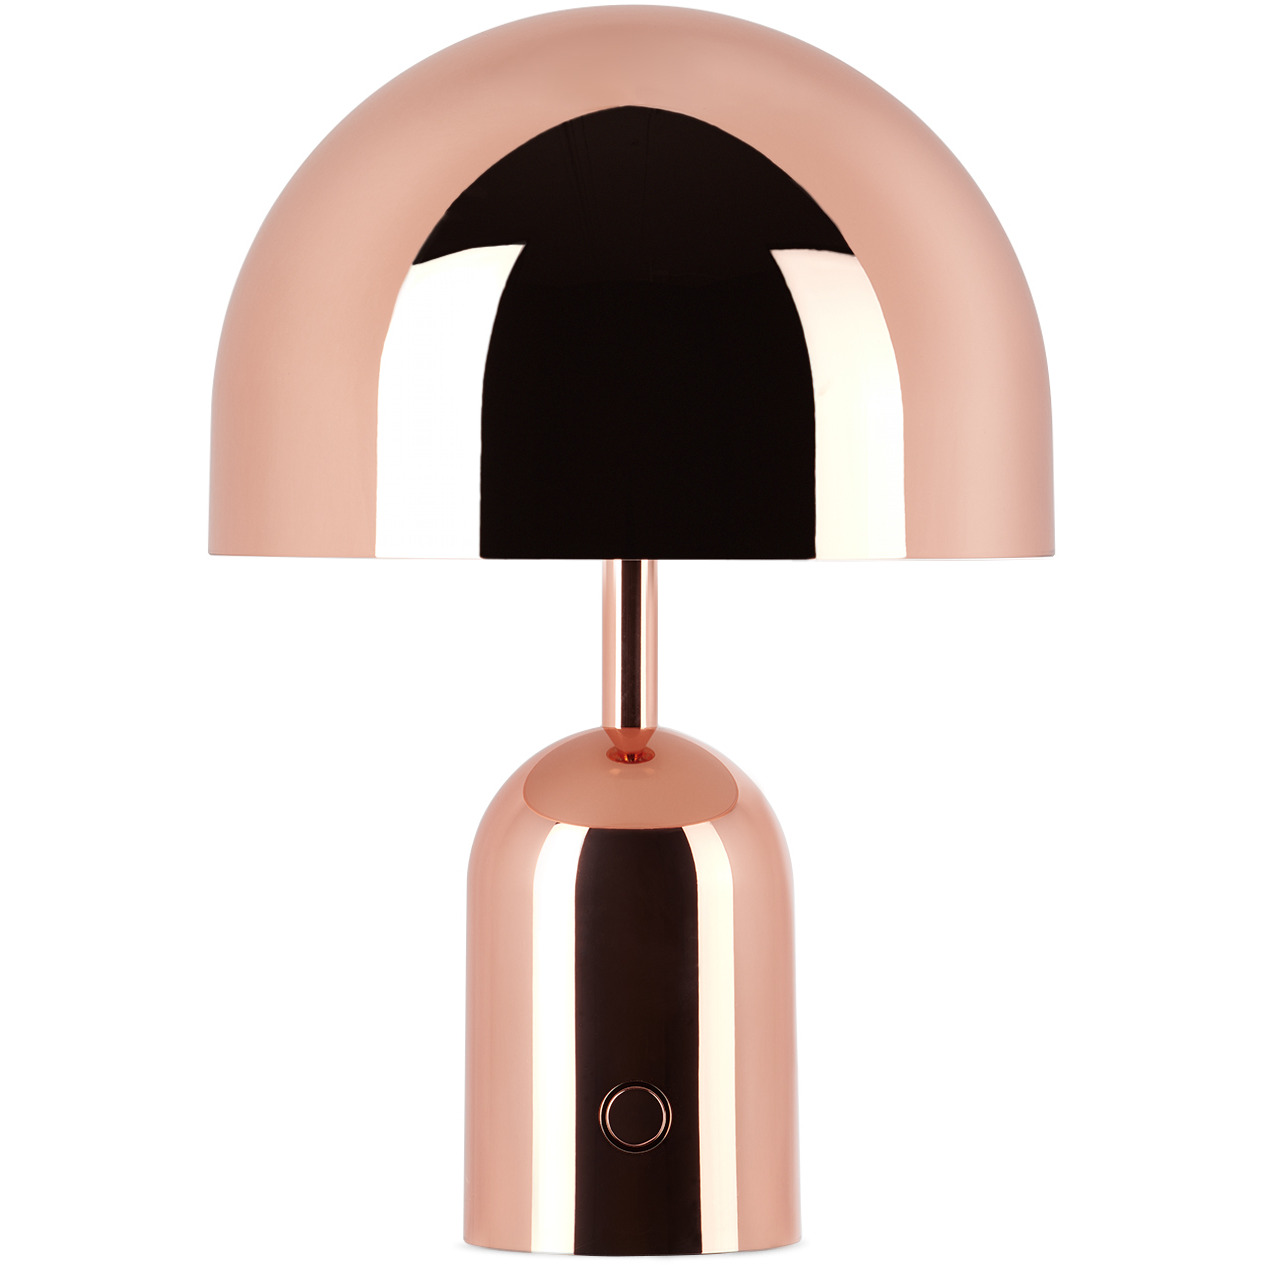 Tom Dixon Copper Bell Portable Table Lamp - image 1